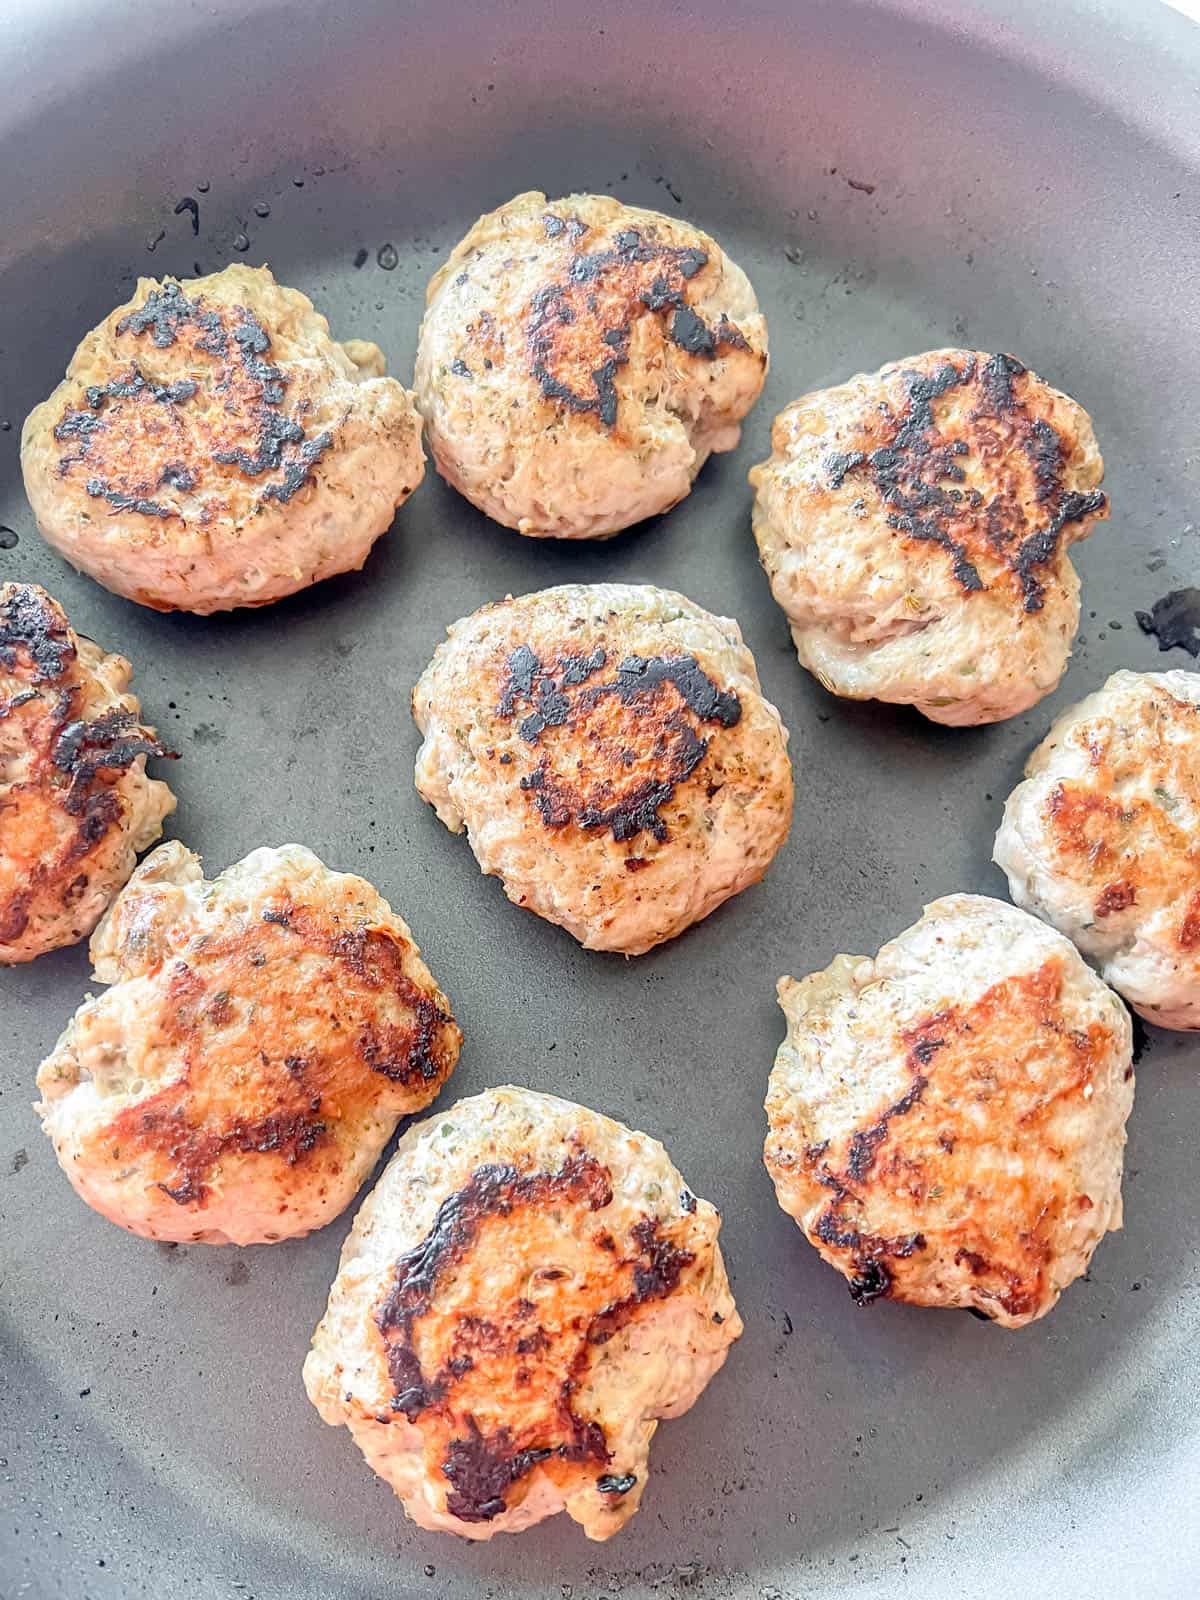 Sausage patties after cooking.